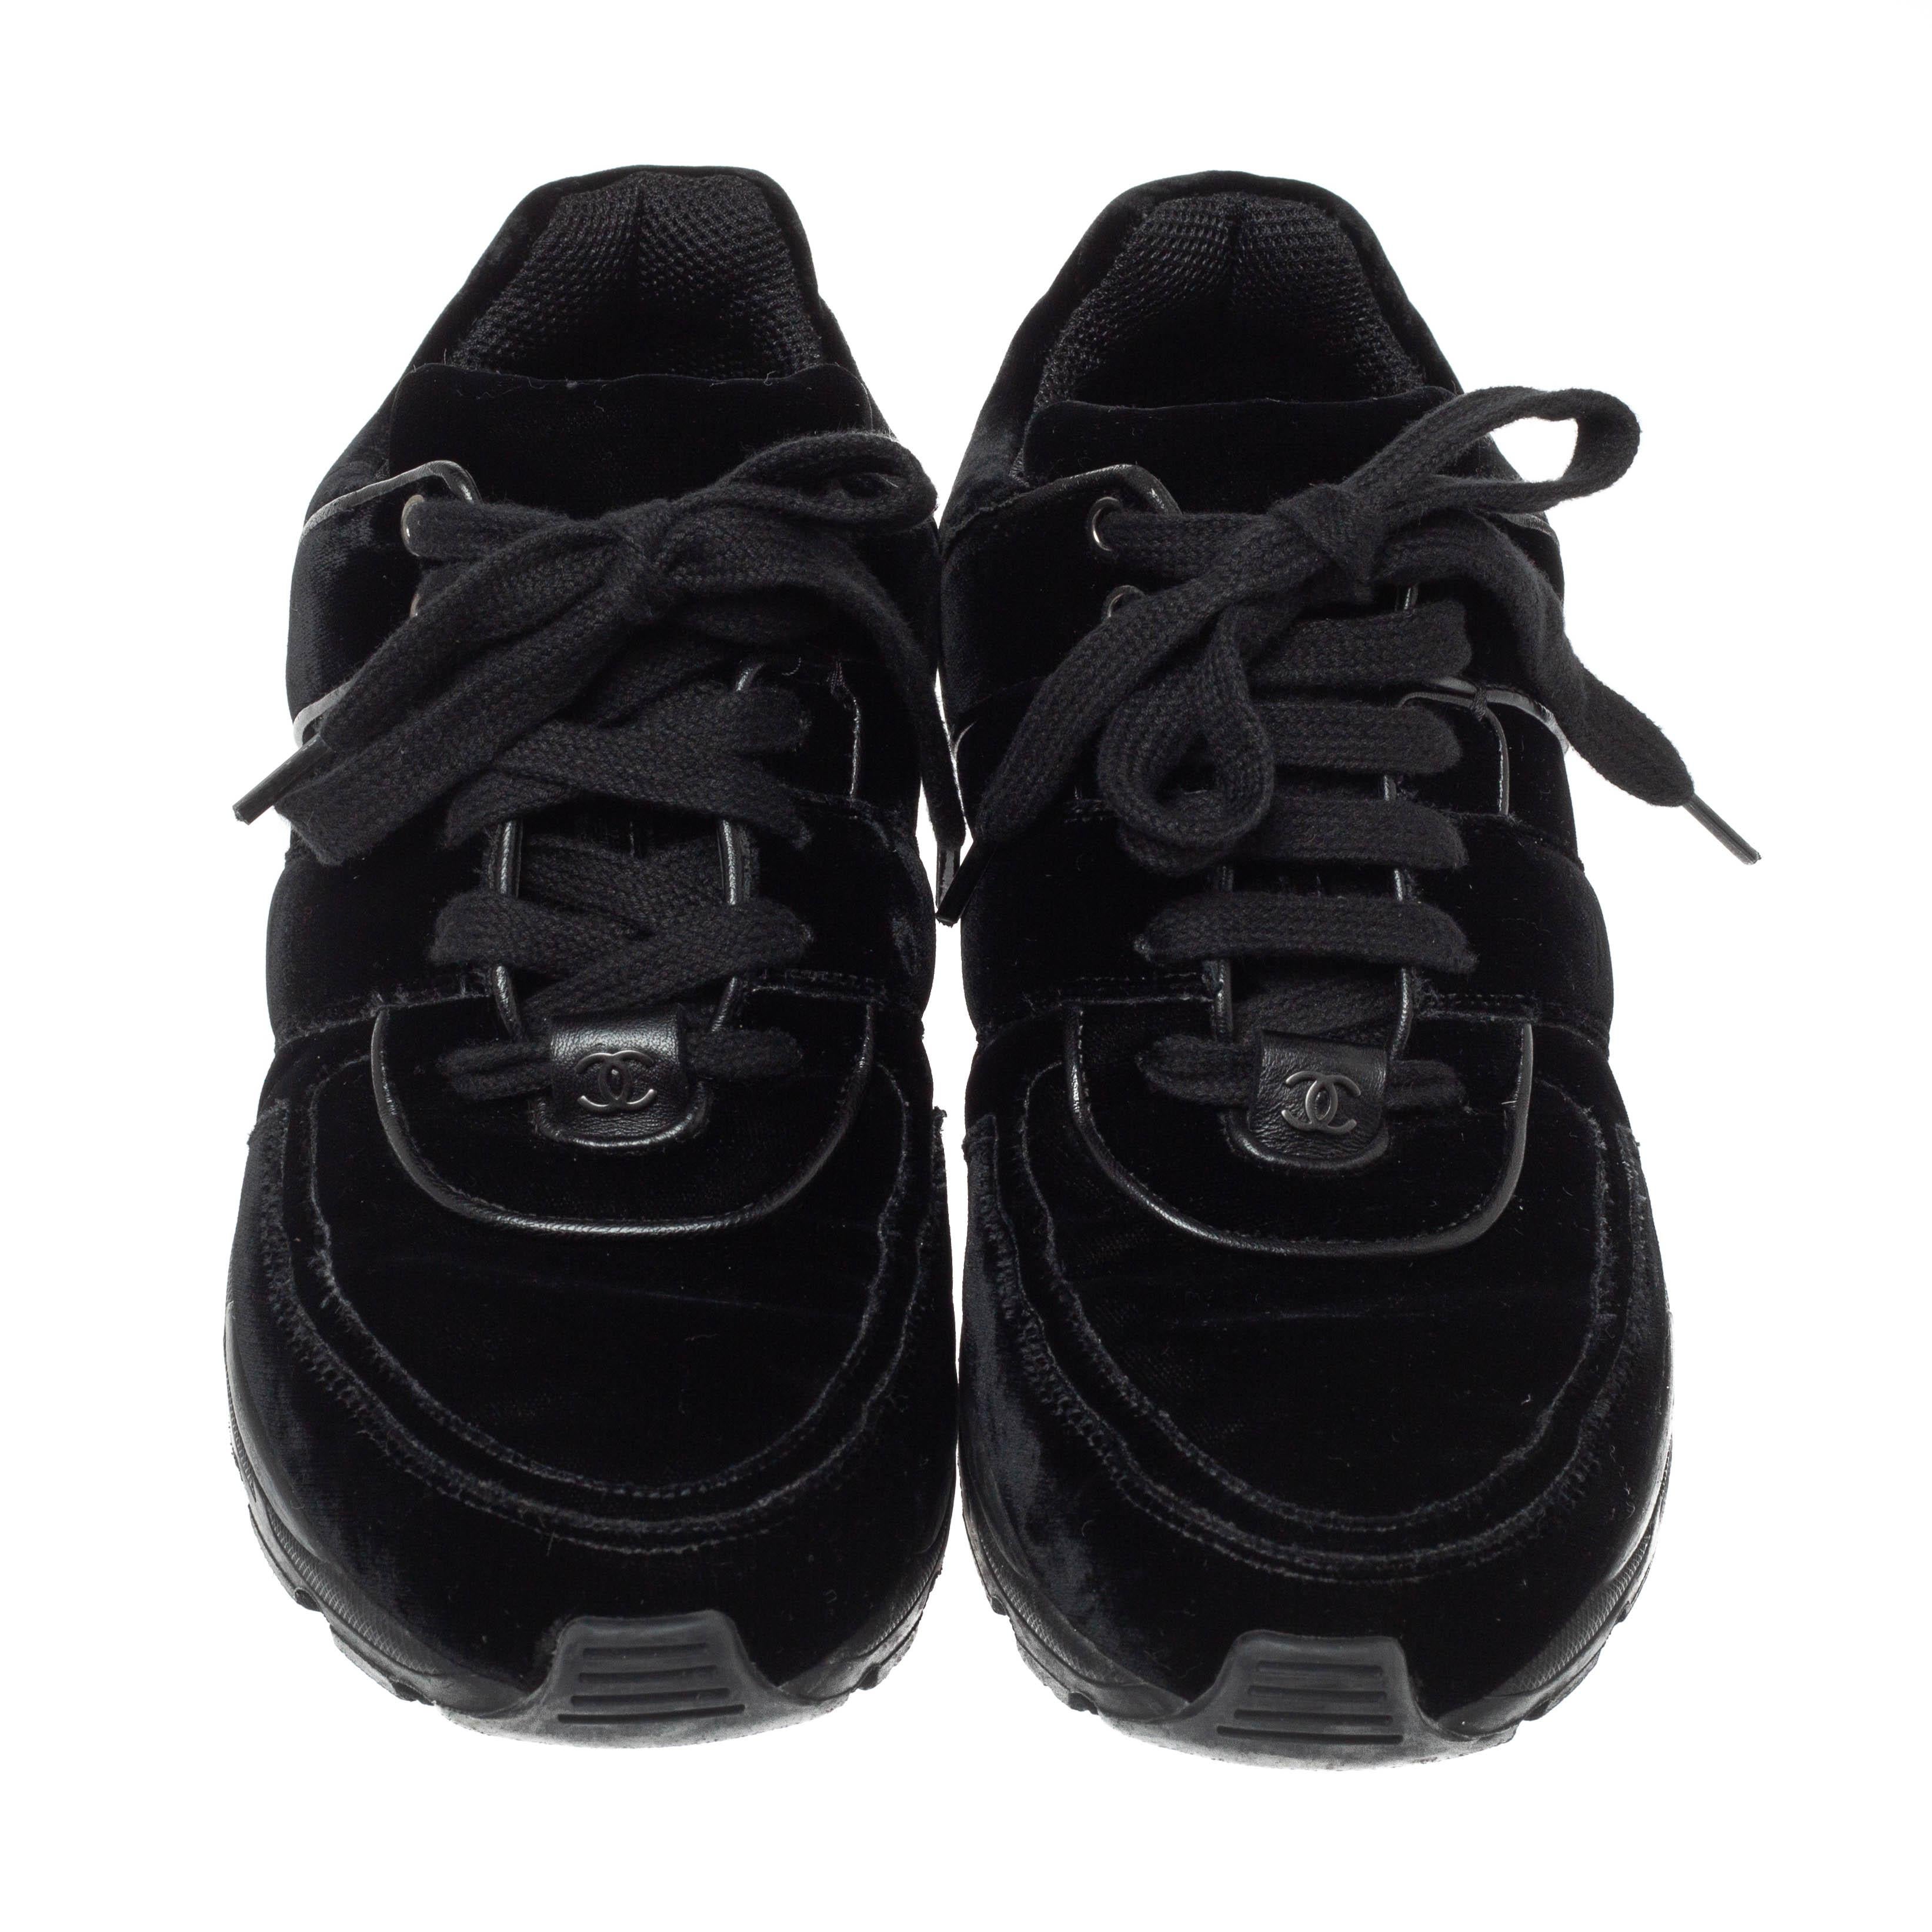 The time to feel trendy is now as Chanel brings you these superhit sneakers in black. They are crafted from velvet with leather trims, detailed with lace-ups and signature CC logo on the vamps, and set on highly comfortable rubber soles. You are